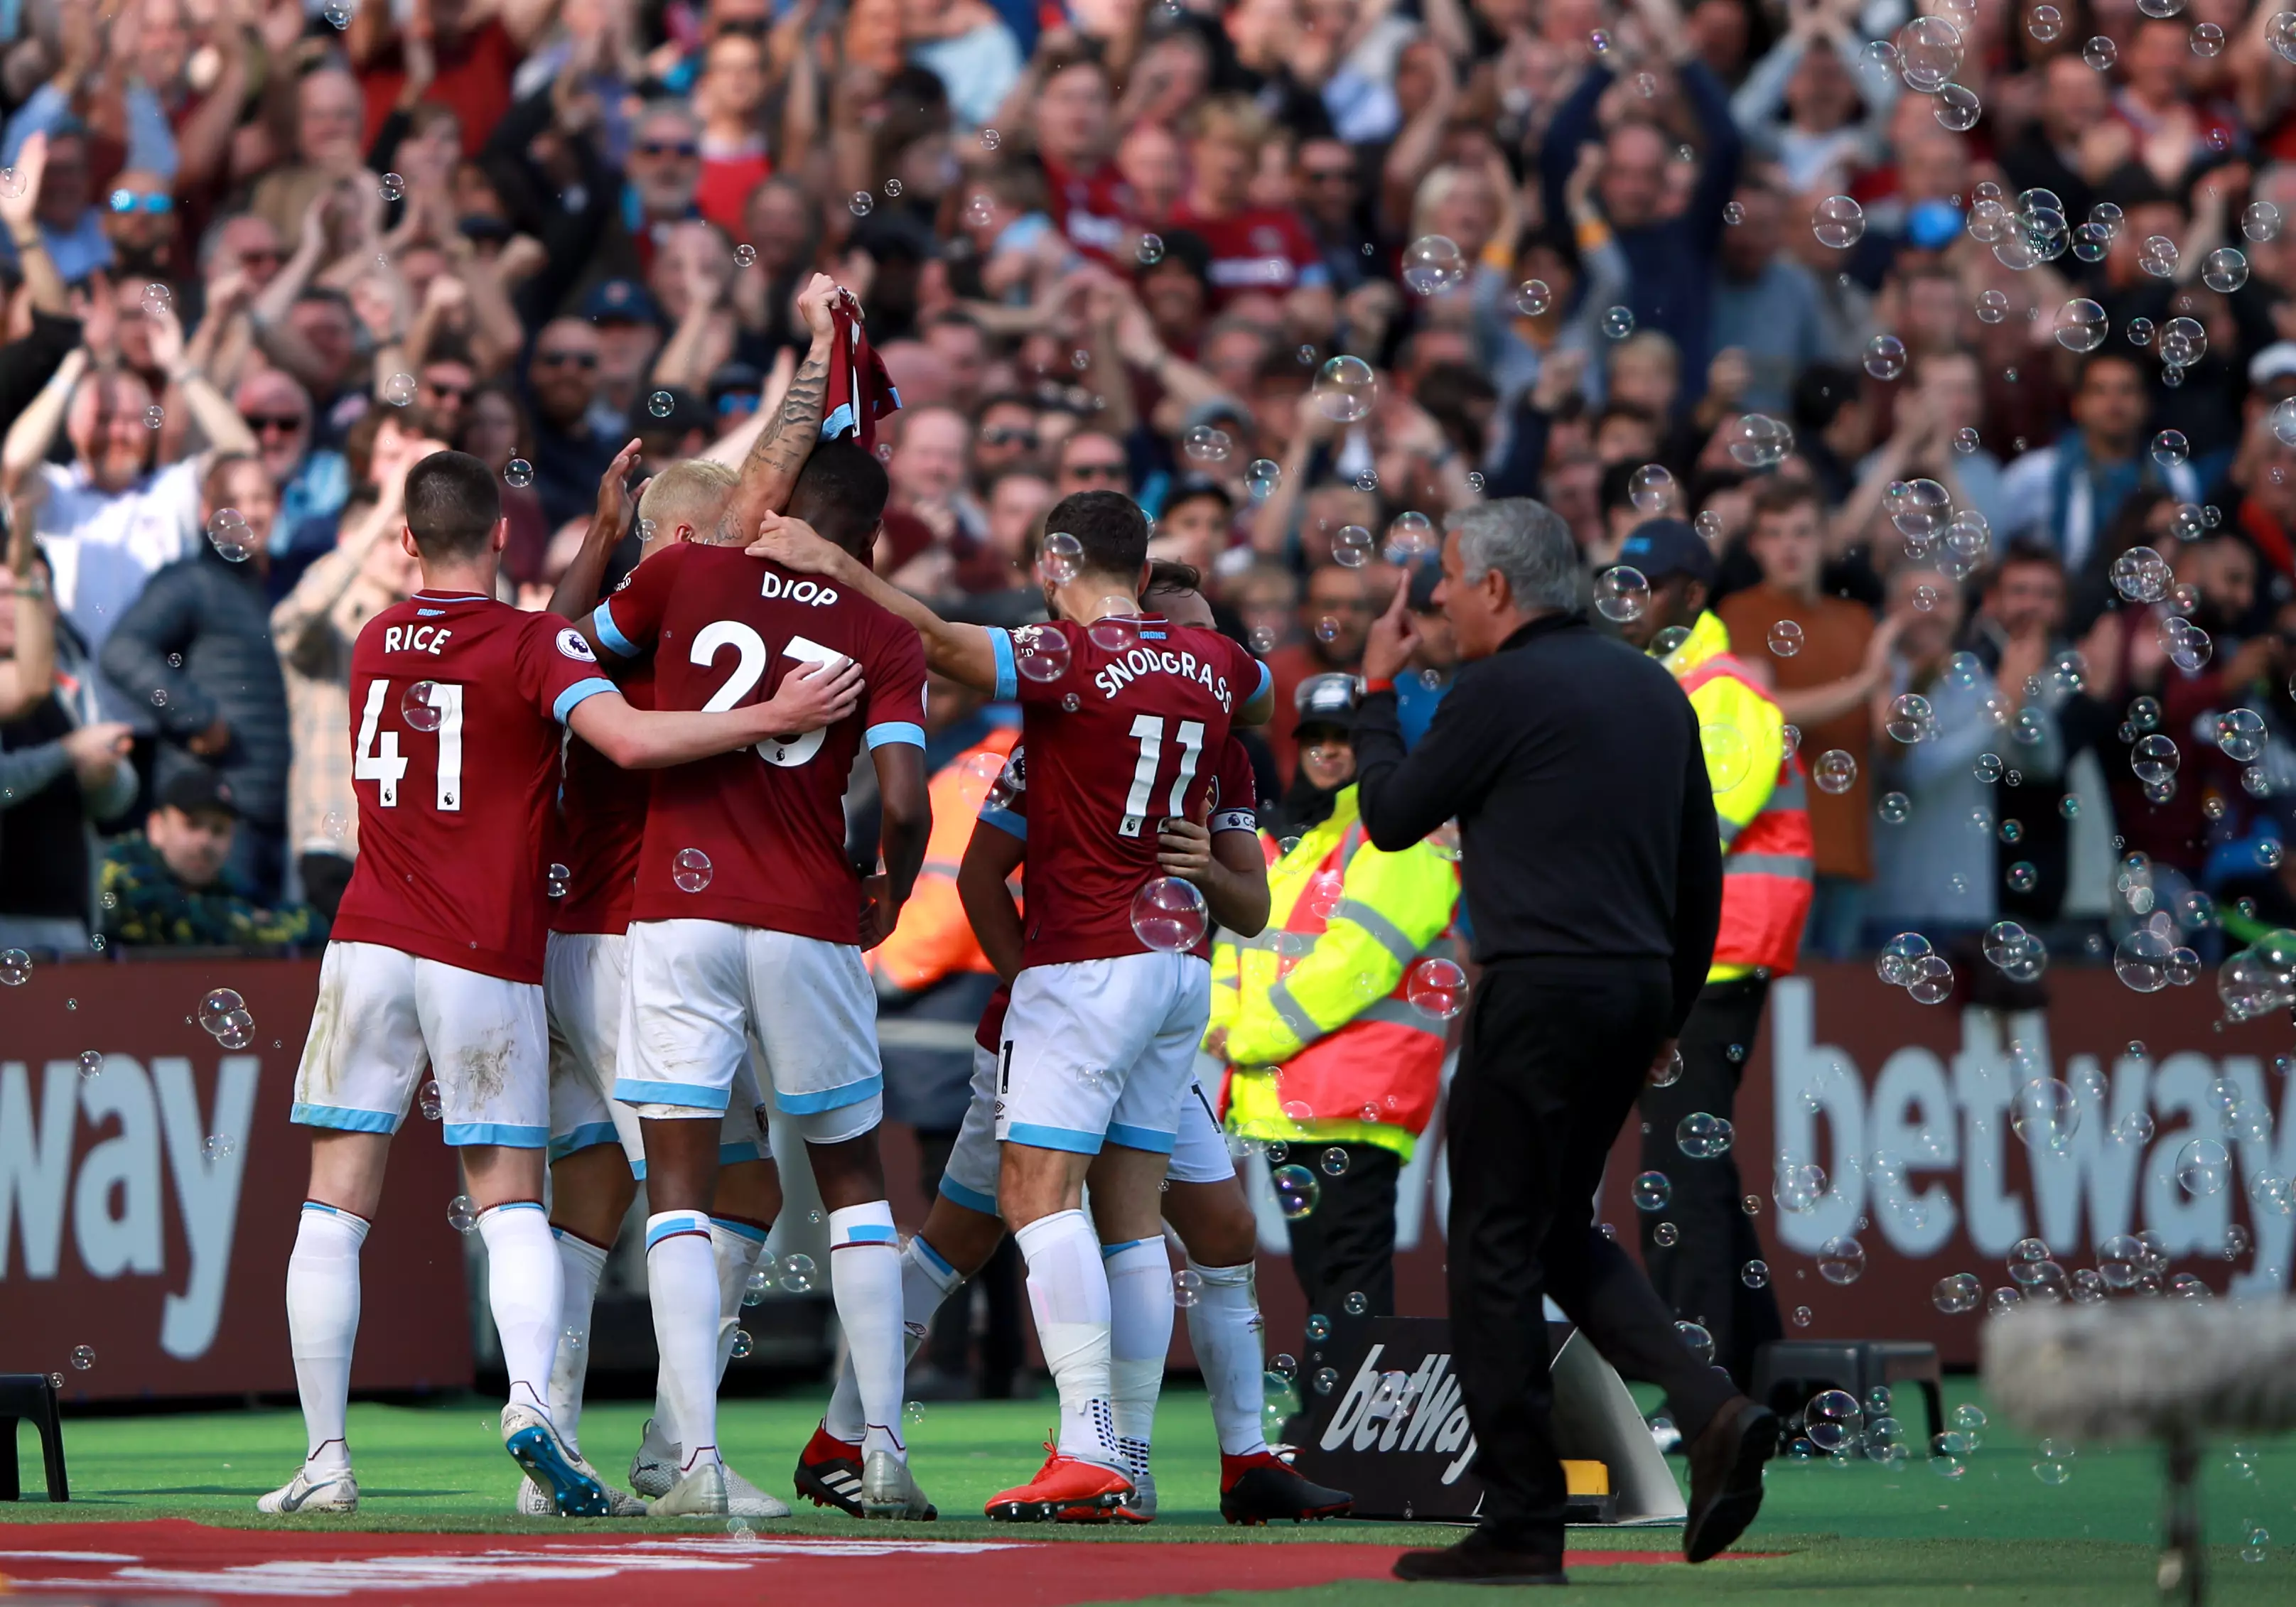 As West Ham players celebrate their third goal Mourinho looks pretty annoyed. Image: PA Images